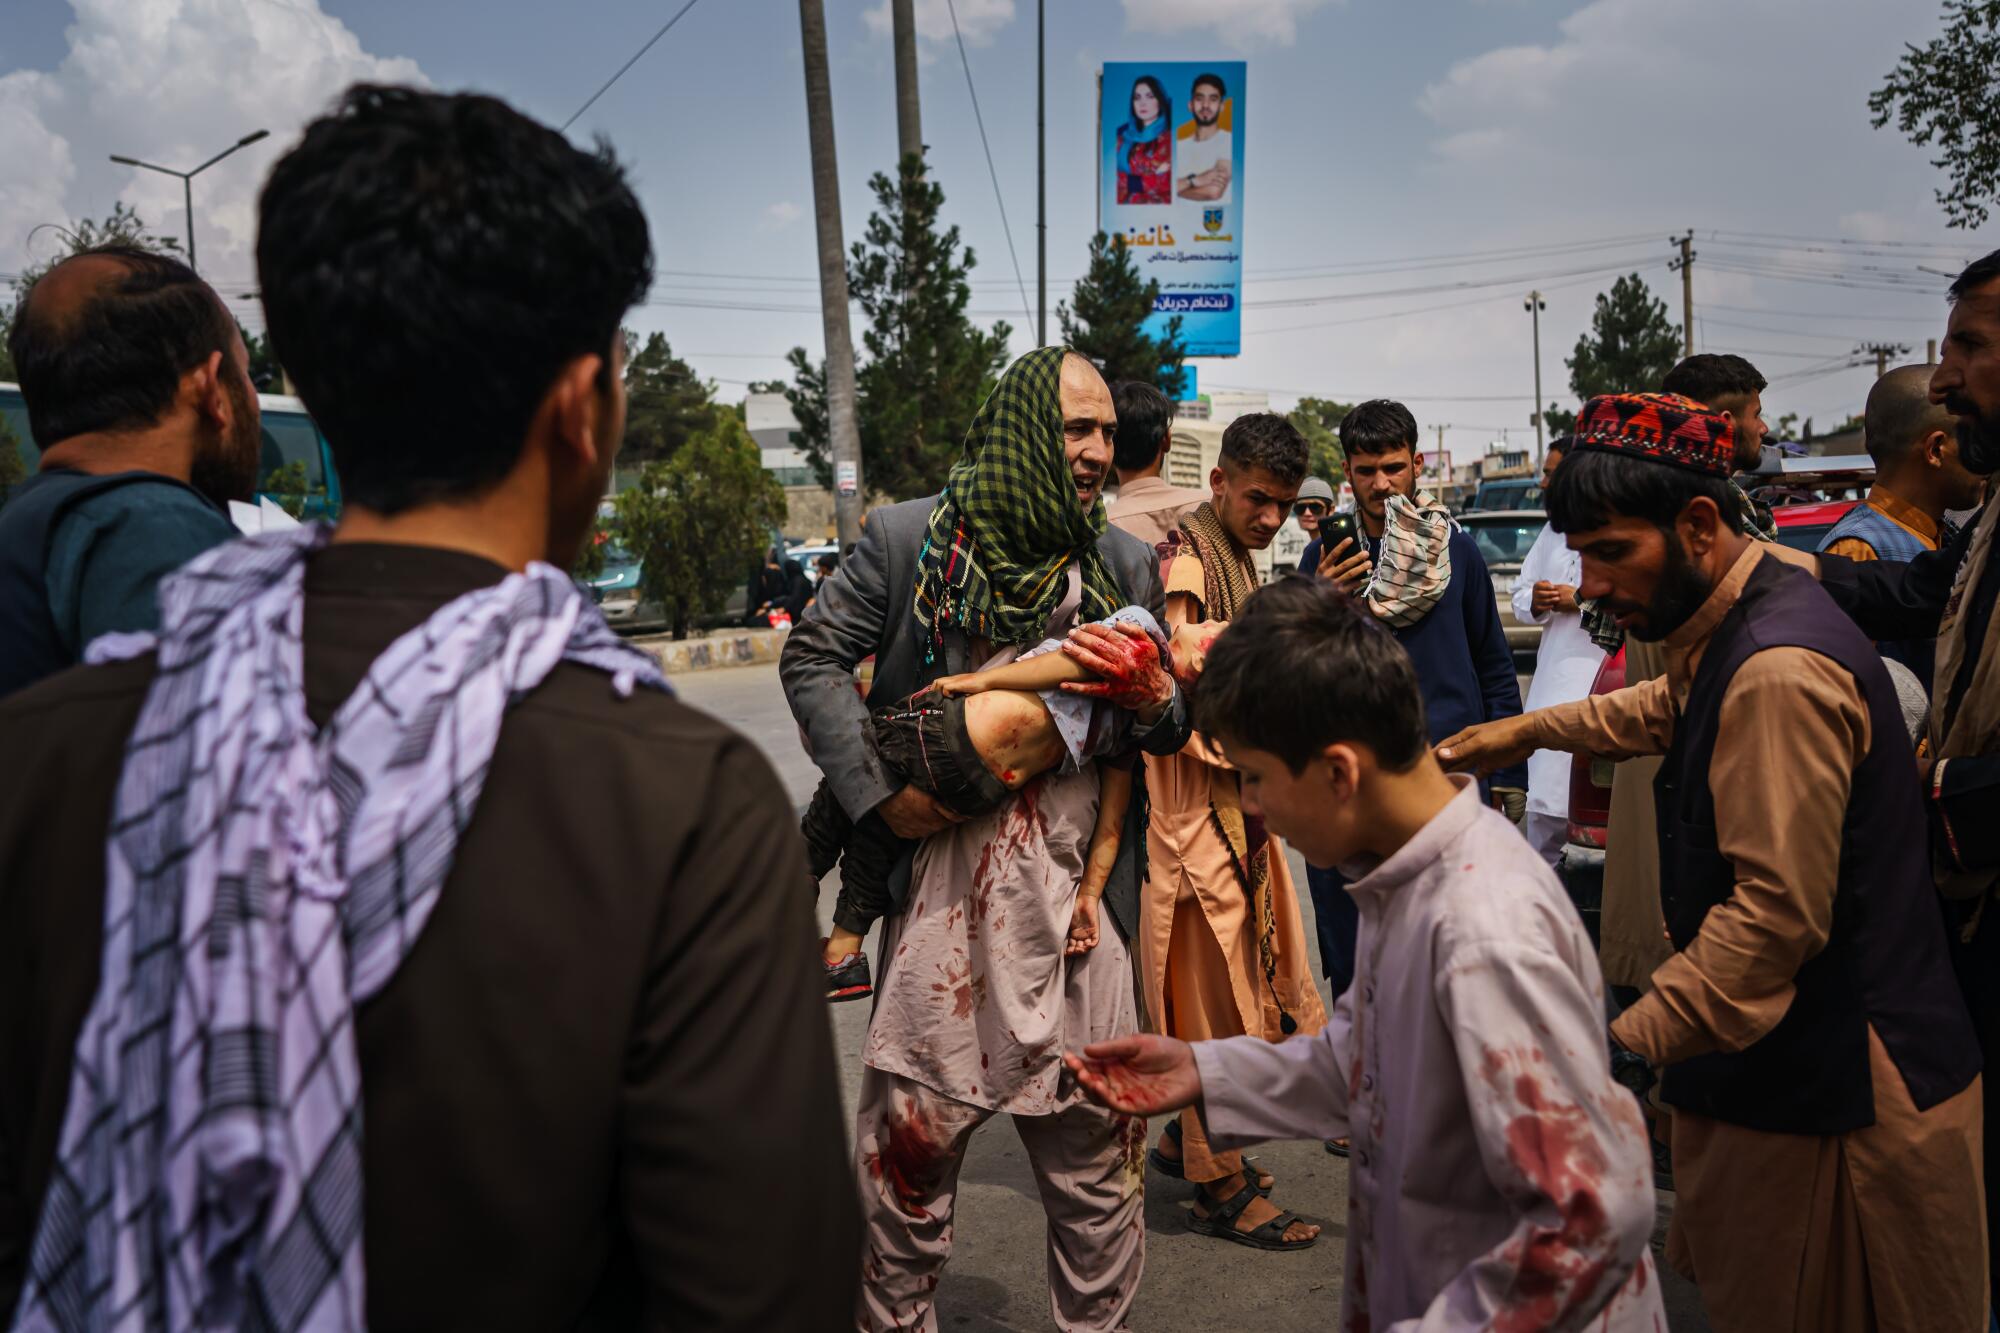 A man in a blood spattered tunic carries an injured child in his arms through a crowd